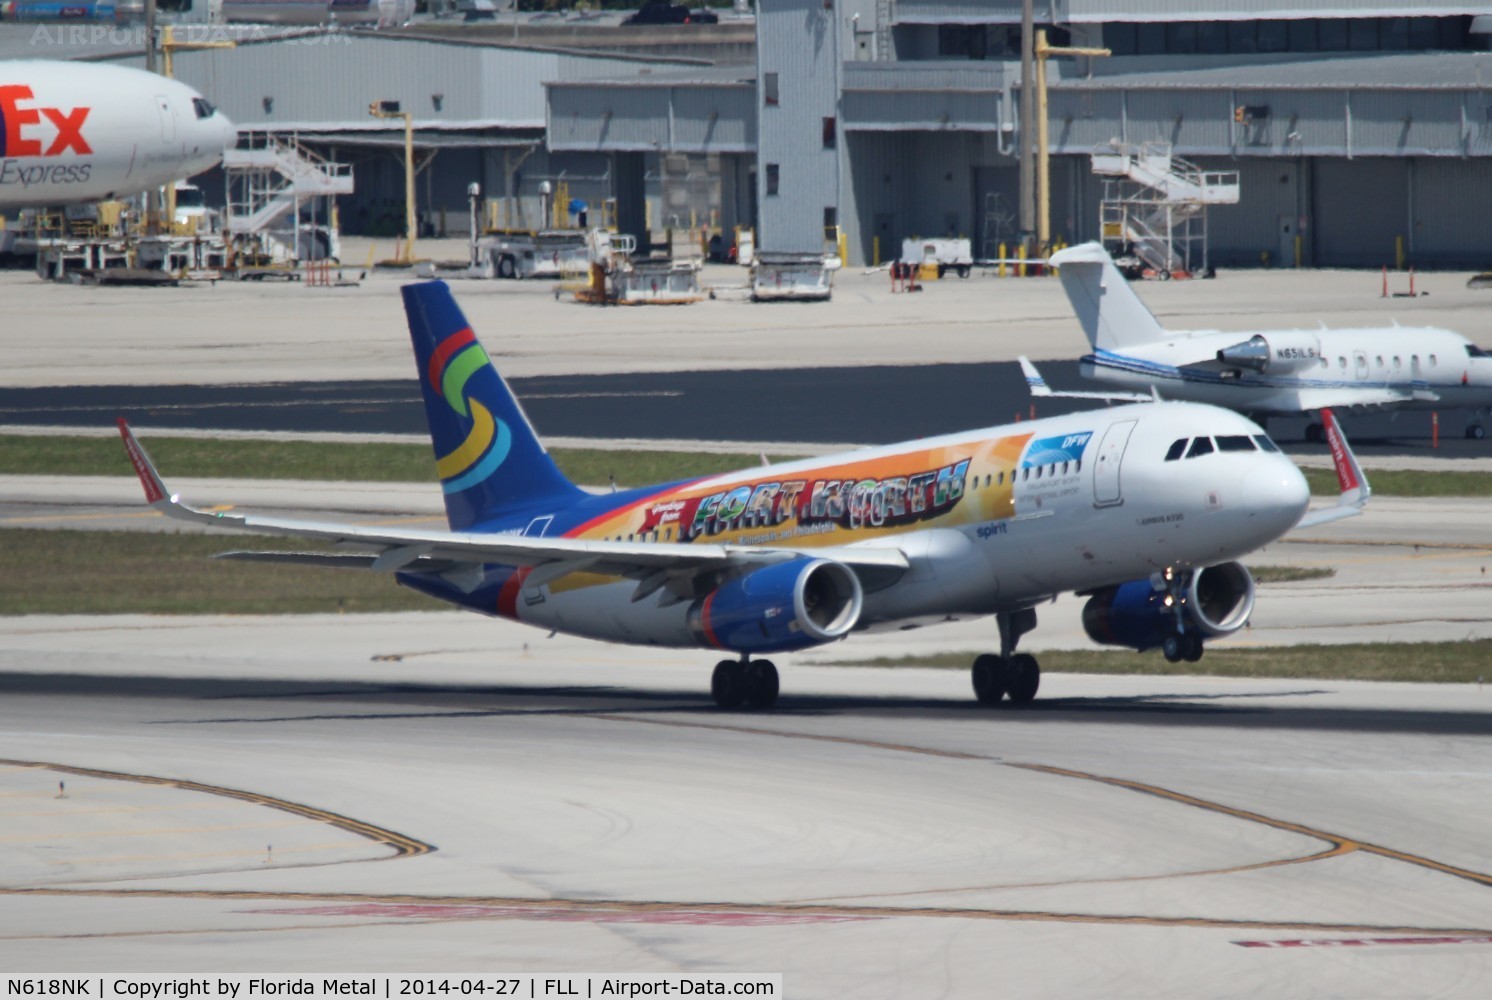 N618NK, 2012 Airbus A320-232 C/N 5458, Spirit Airlines post card livery